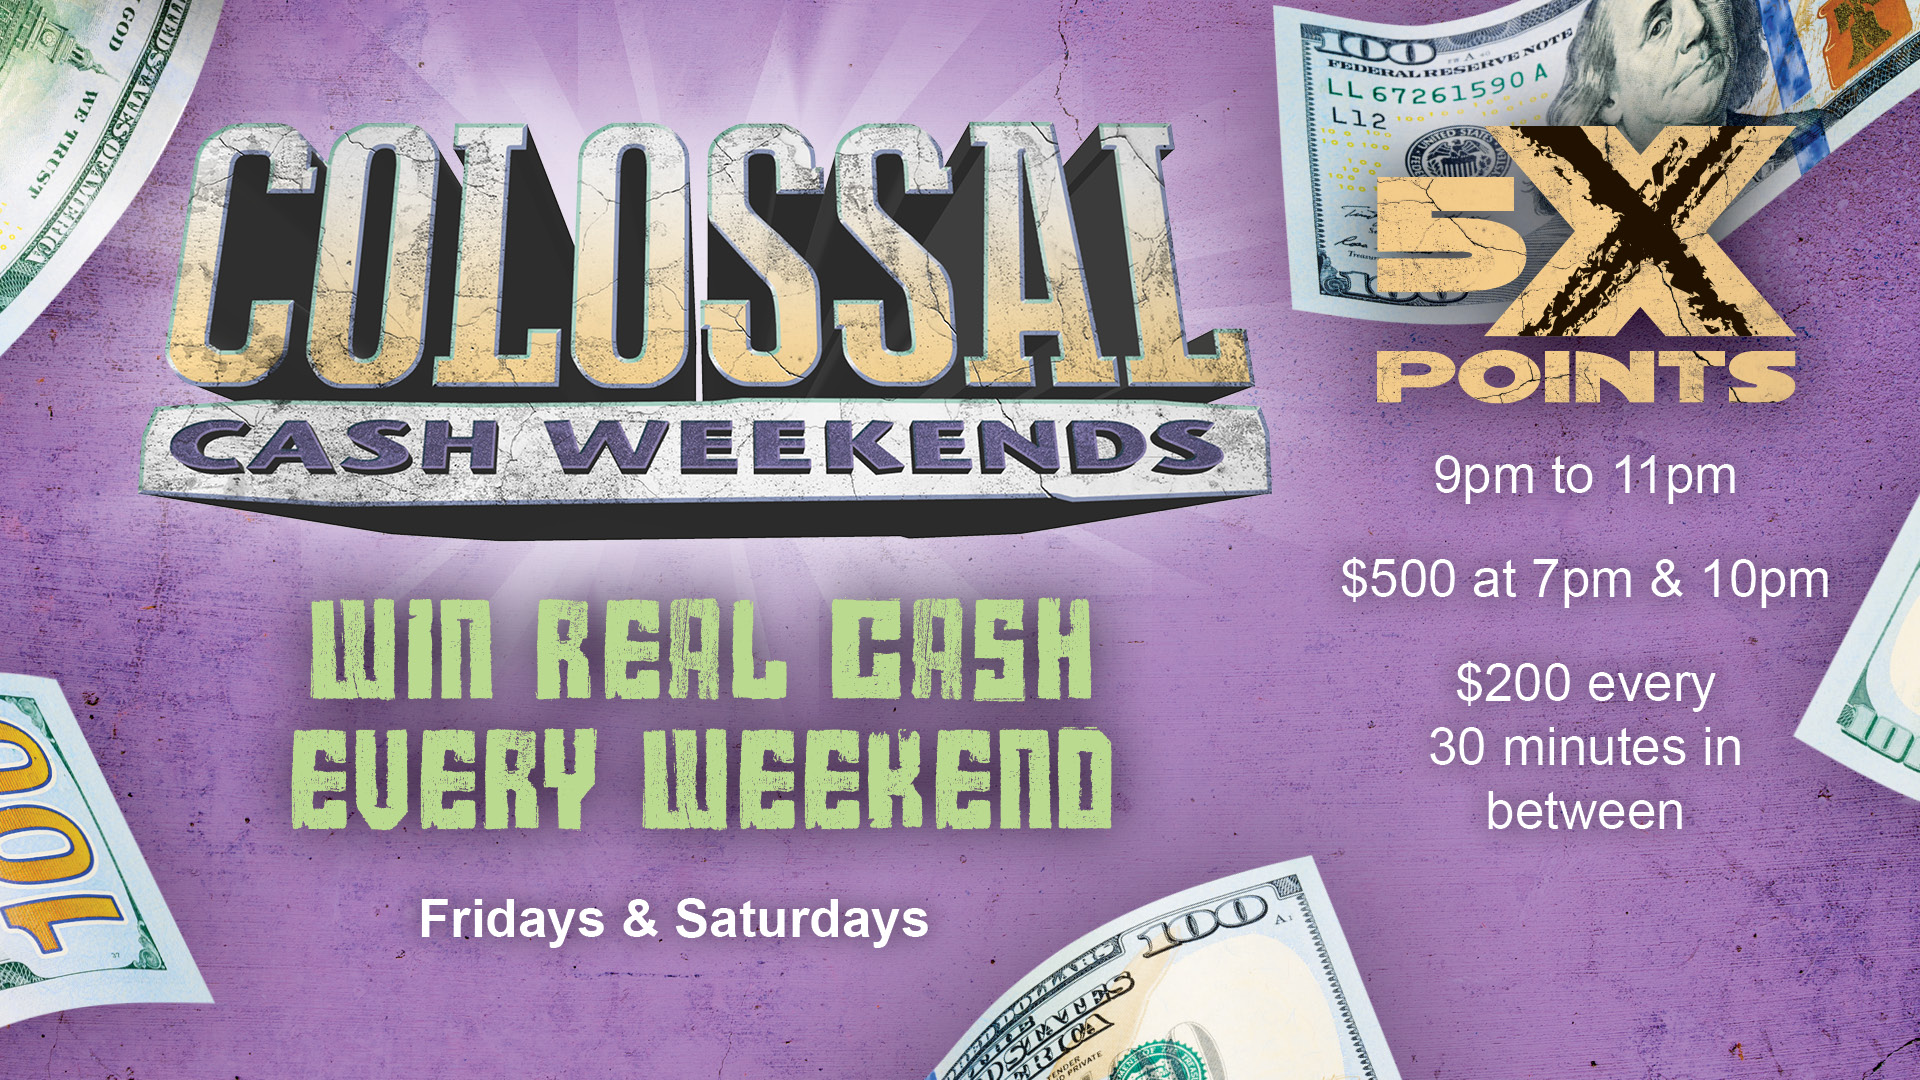 Colossal Cash Weekends - win real cash every weekend, Fridays and Saturdays. 5X Points 9pm to 11pm. $500 at 7pm & 10pm. $200 every 30 minutes in between. Cinco De Mayo replaces Colossal Cash on May 5th.